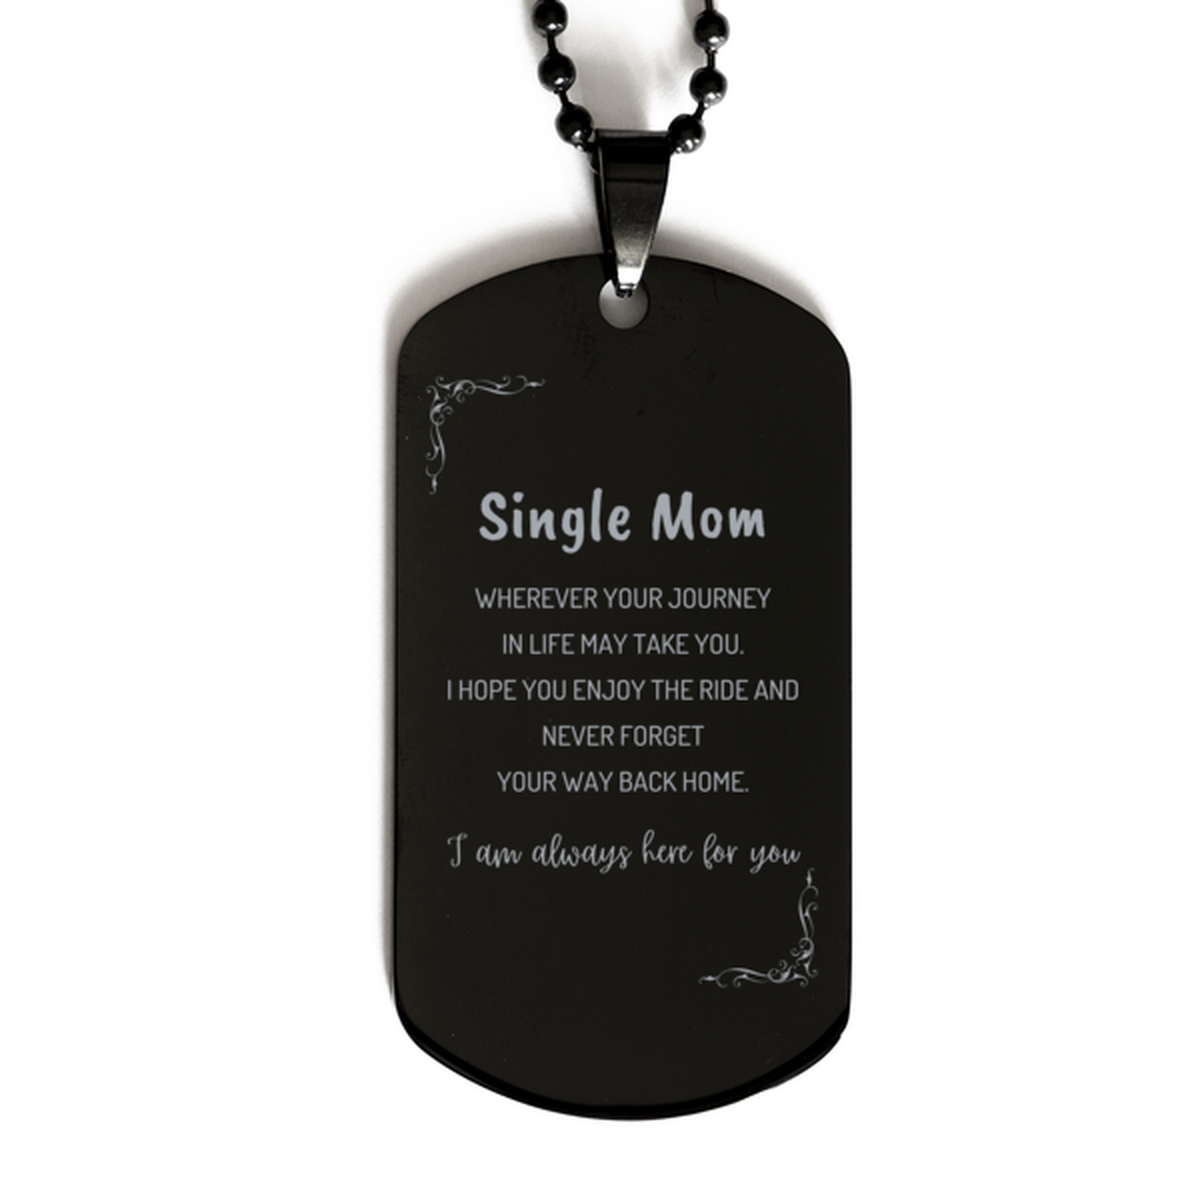 Single Mom wherever your journey in life may take you, I am always here for you Single Mom Black Dog Tag, Awesome Christmas Gifts For Single Mom, Single Mom Birthday Gifts for Men Women Family Loved One